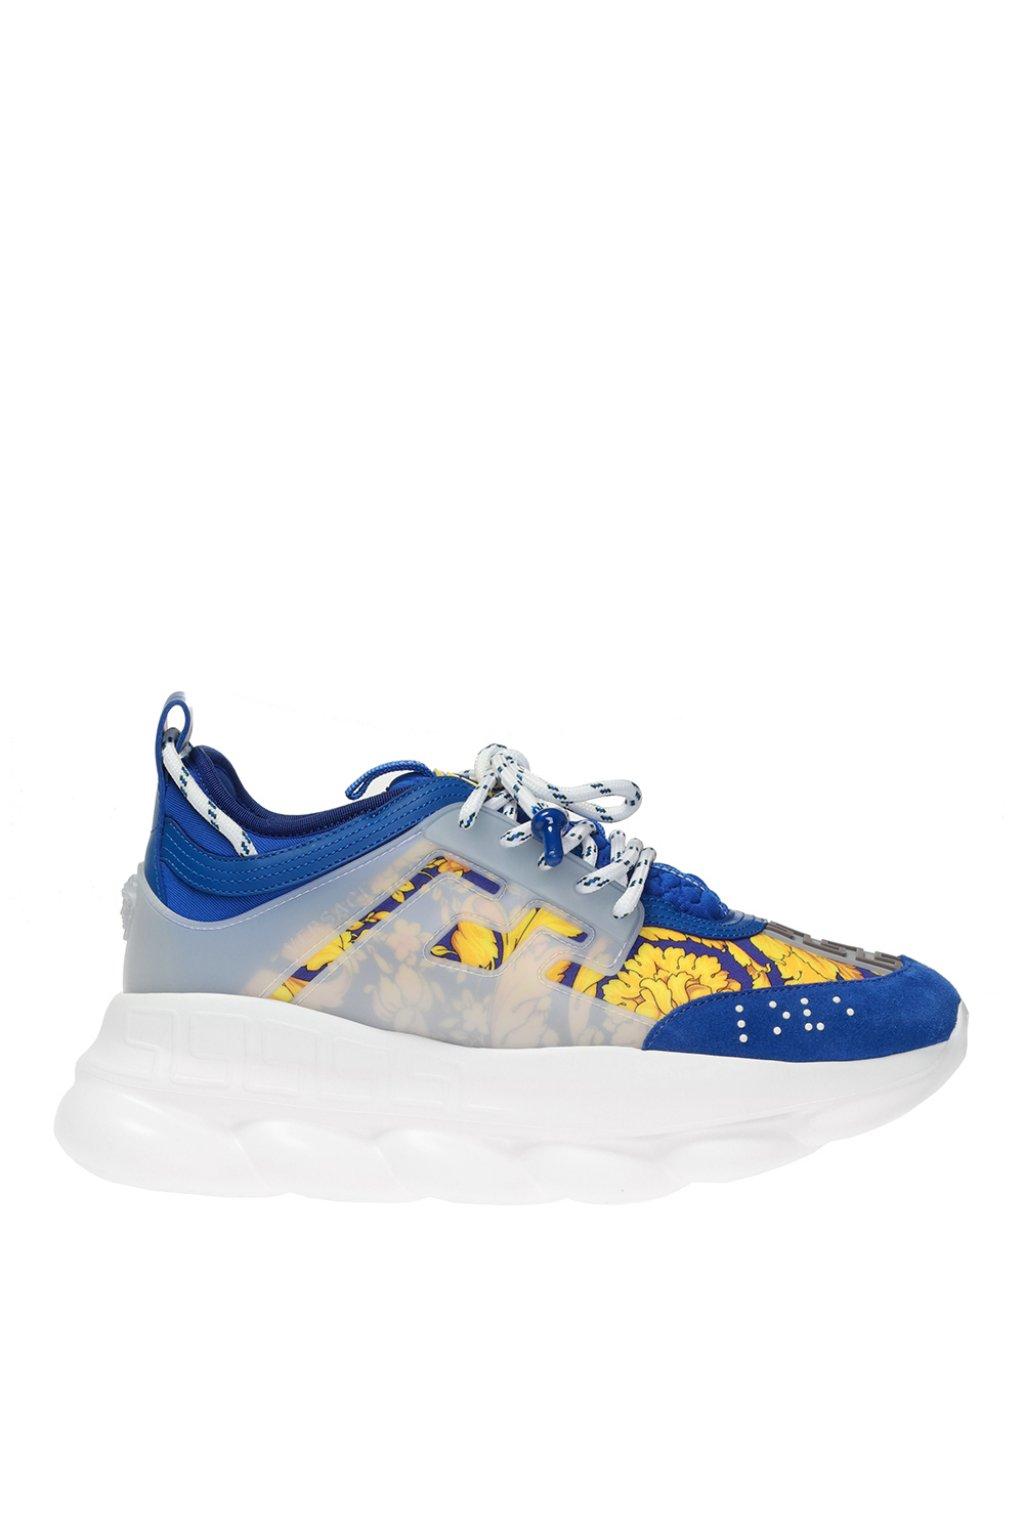 Versace Chain Reaction Twill And Suede Trainers in Blue for Men - Save ...